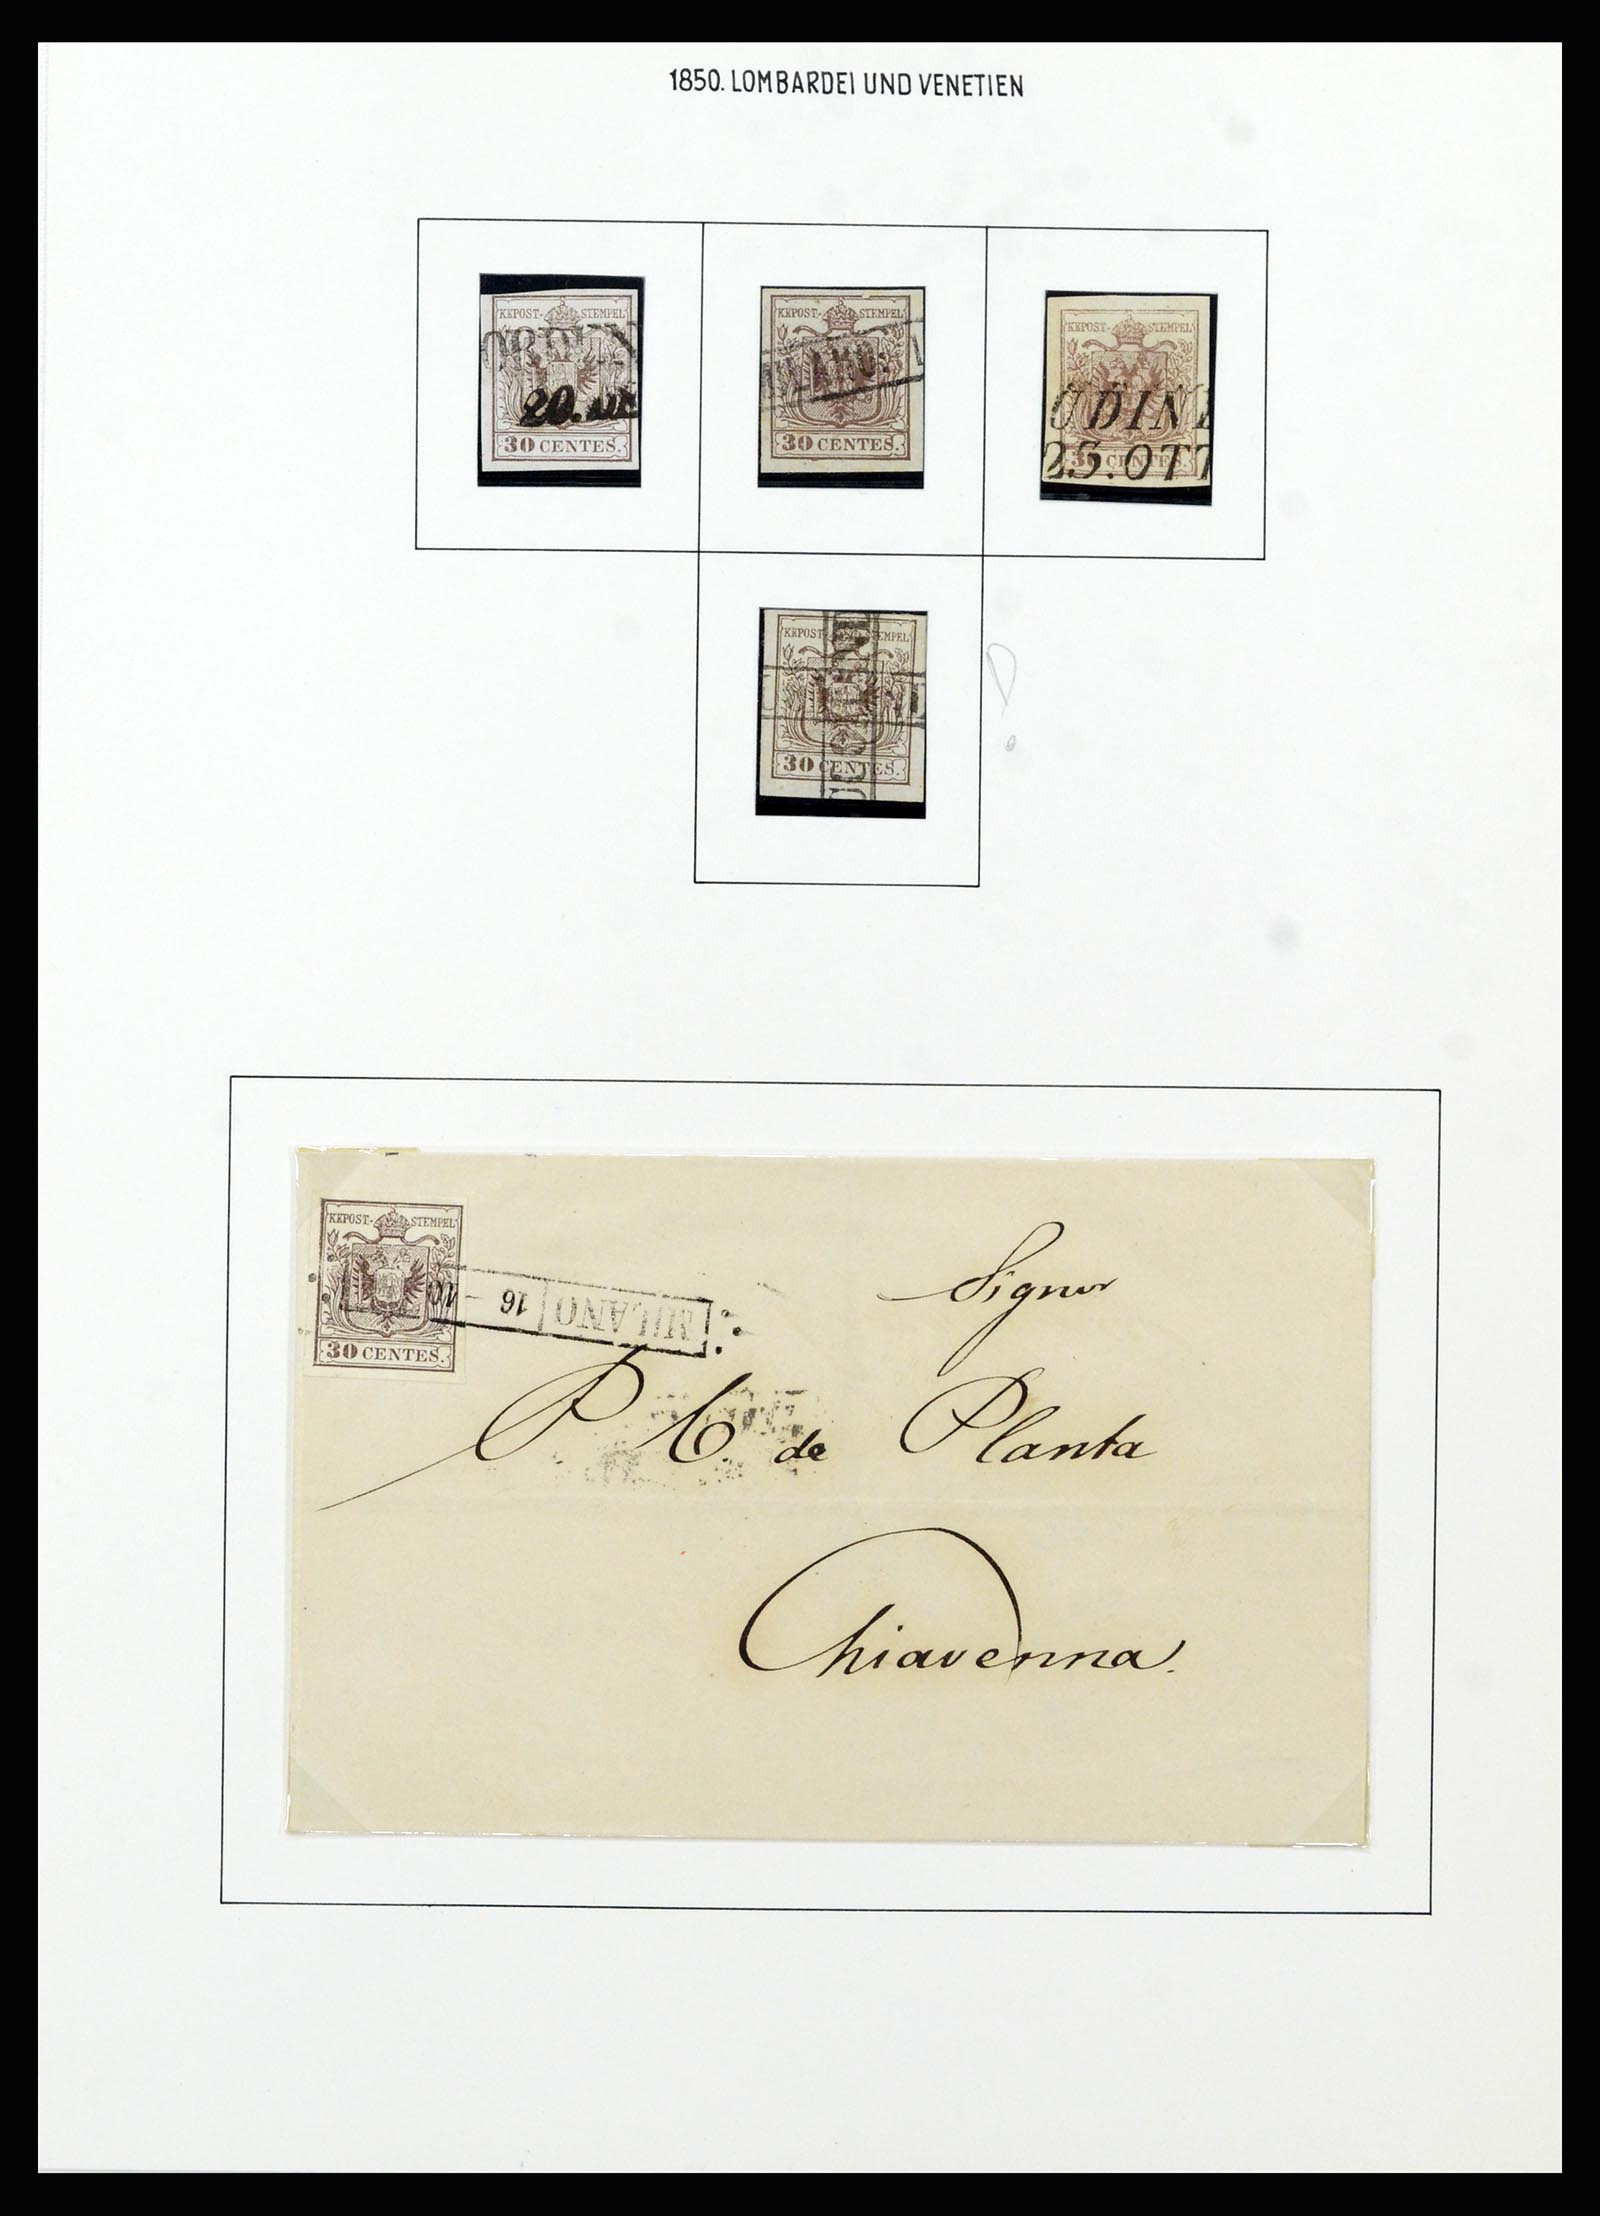 37153 011 - Stamp collection 37153 Lombardy-Venetia 1850-1864.